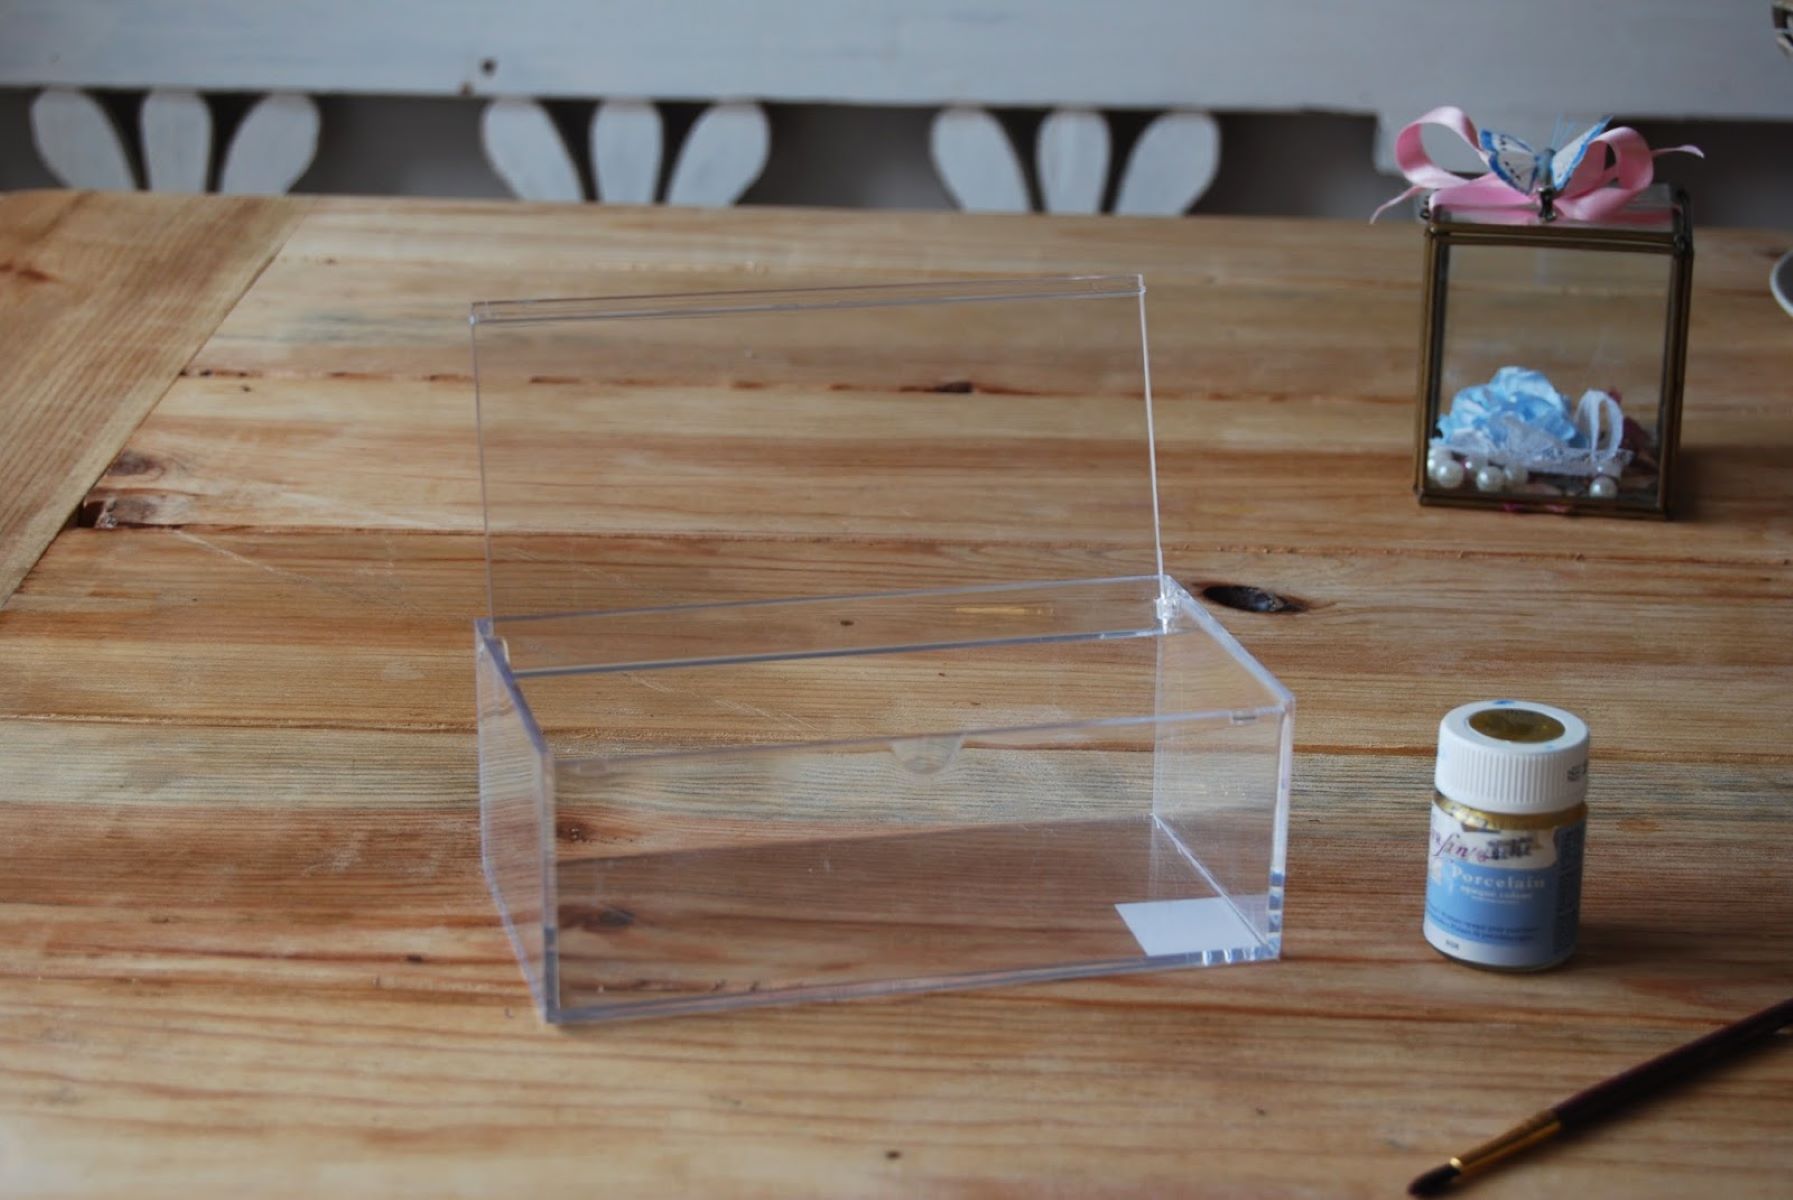 How To Make A Glass Box